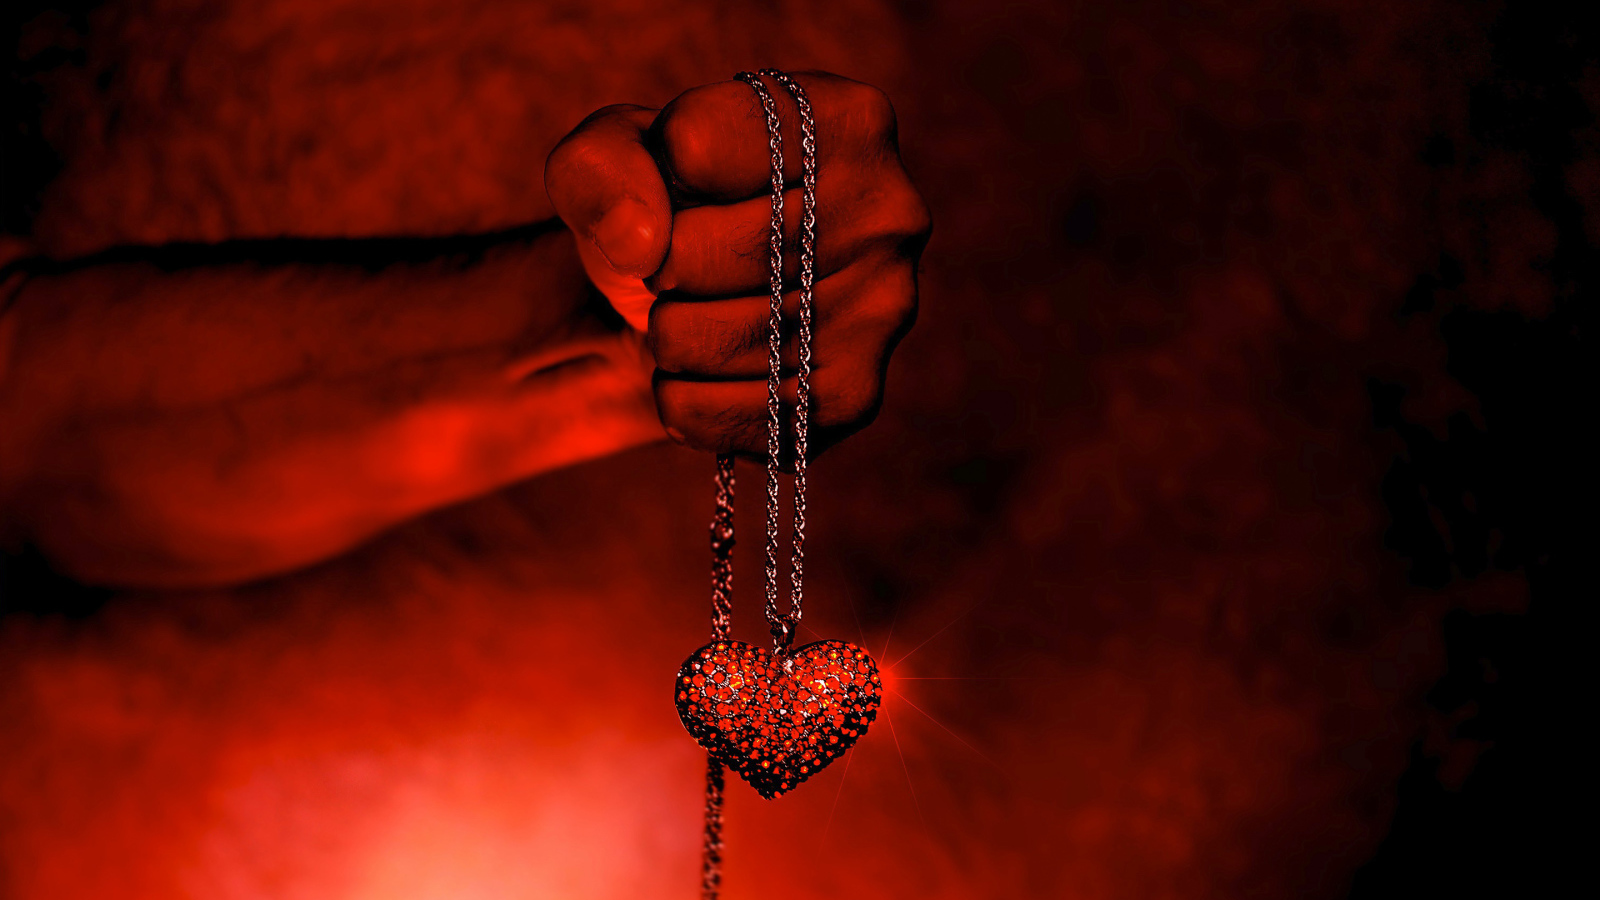 Pendant with a heart on a chain in a man's hand